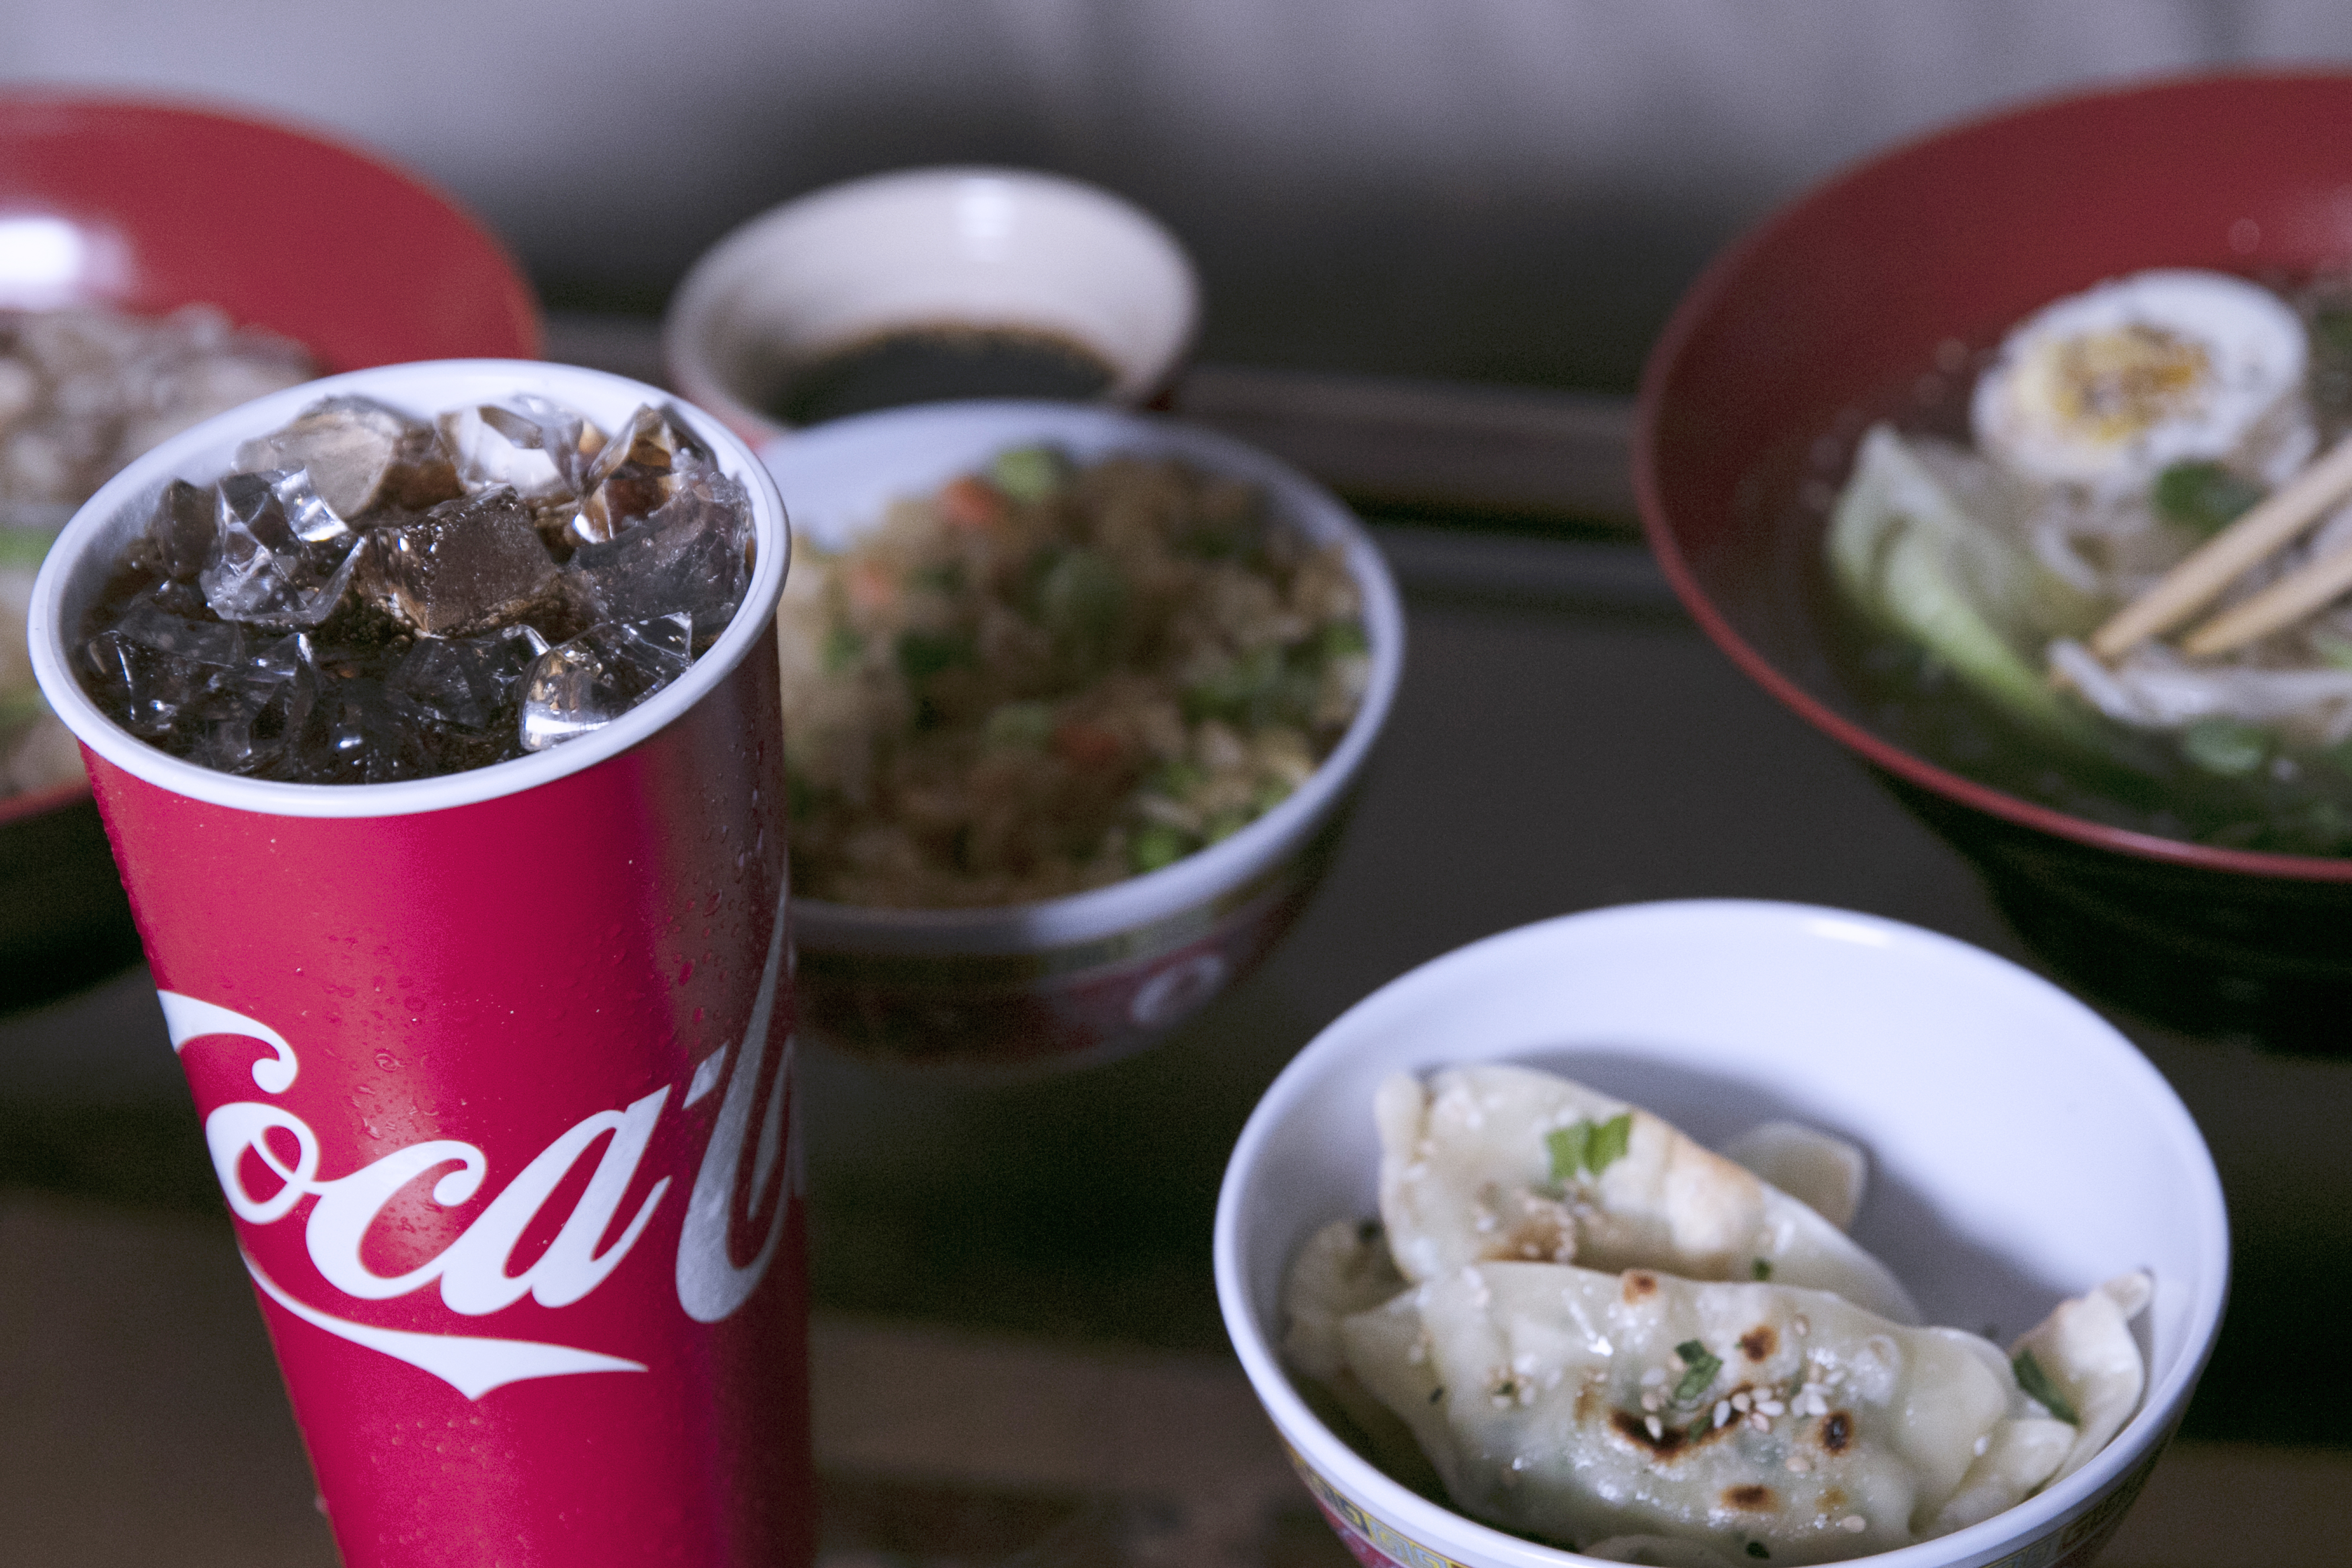 A paper cup of Coca-Cola on ice, sitting on a table with a variety of foods, such as dumplings and fried rice.